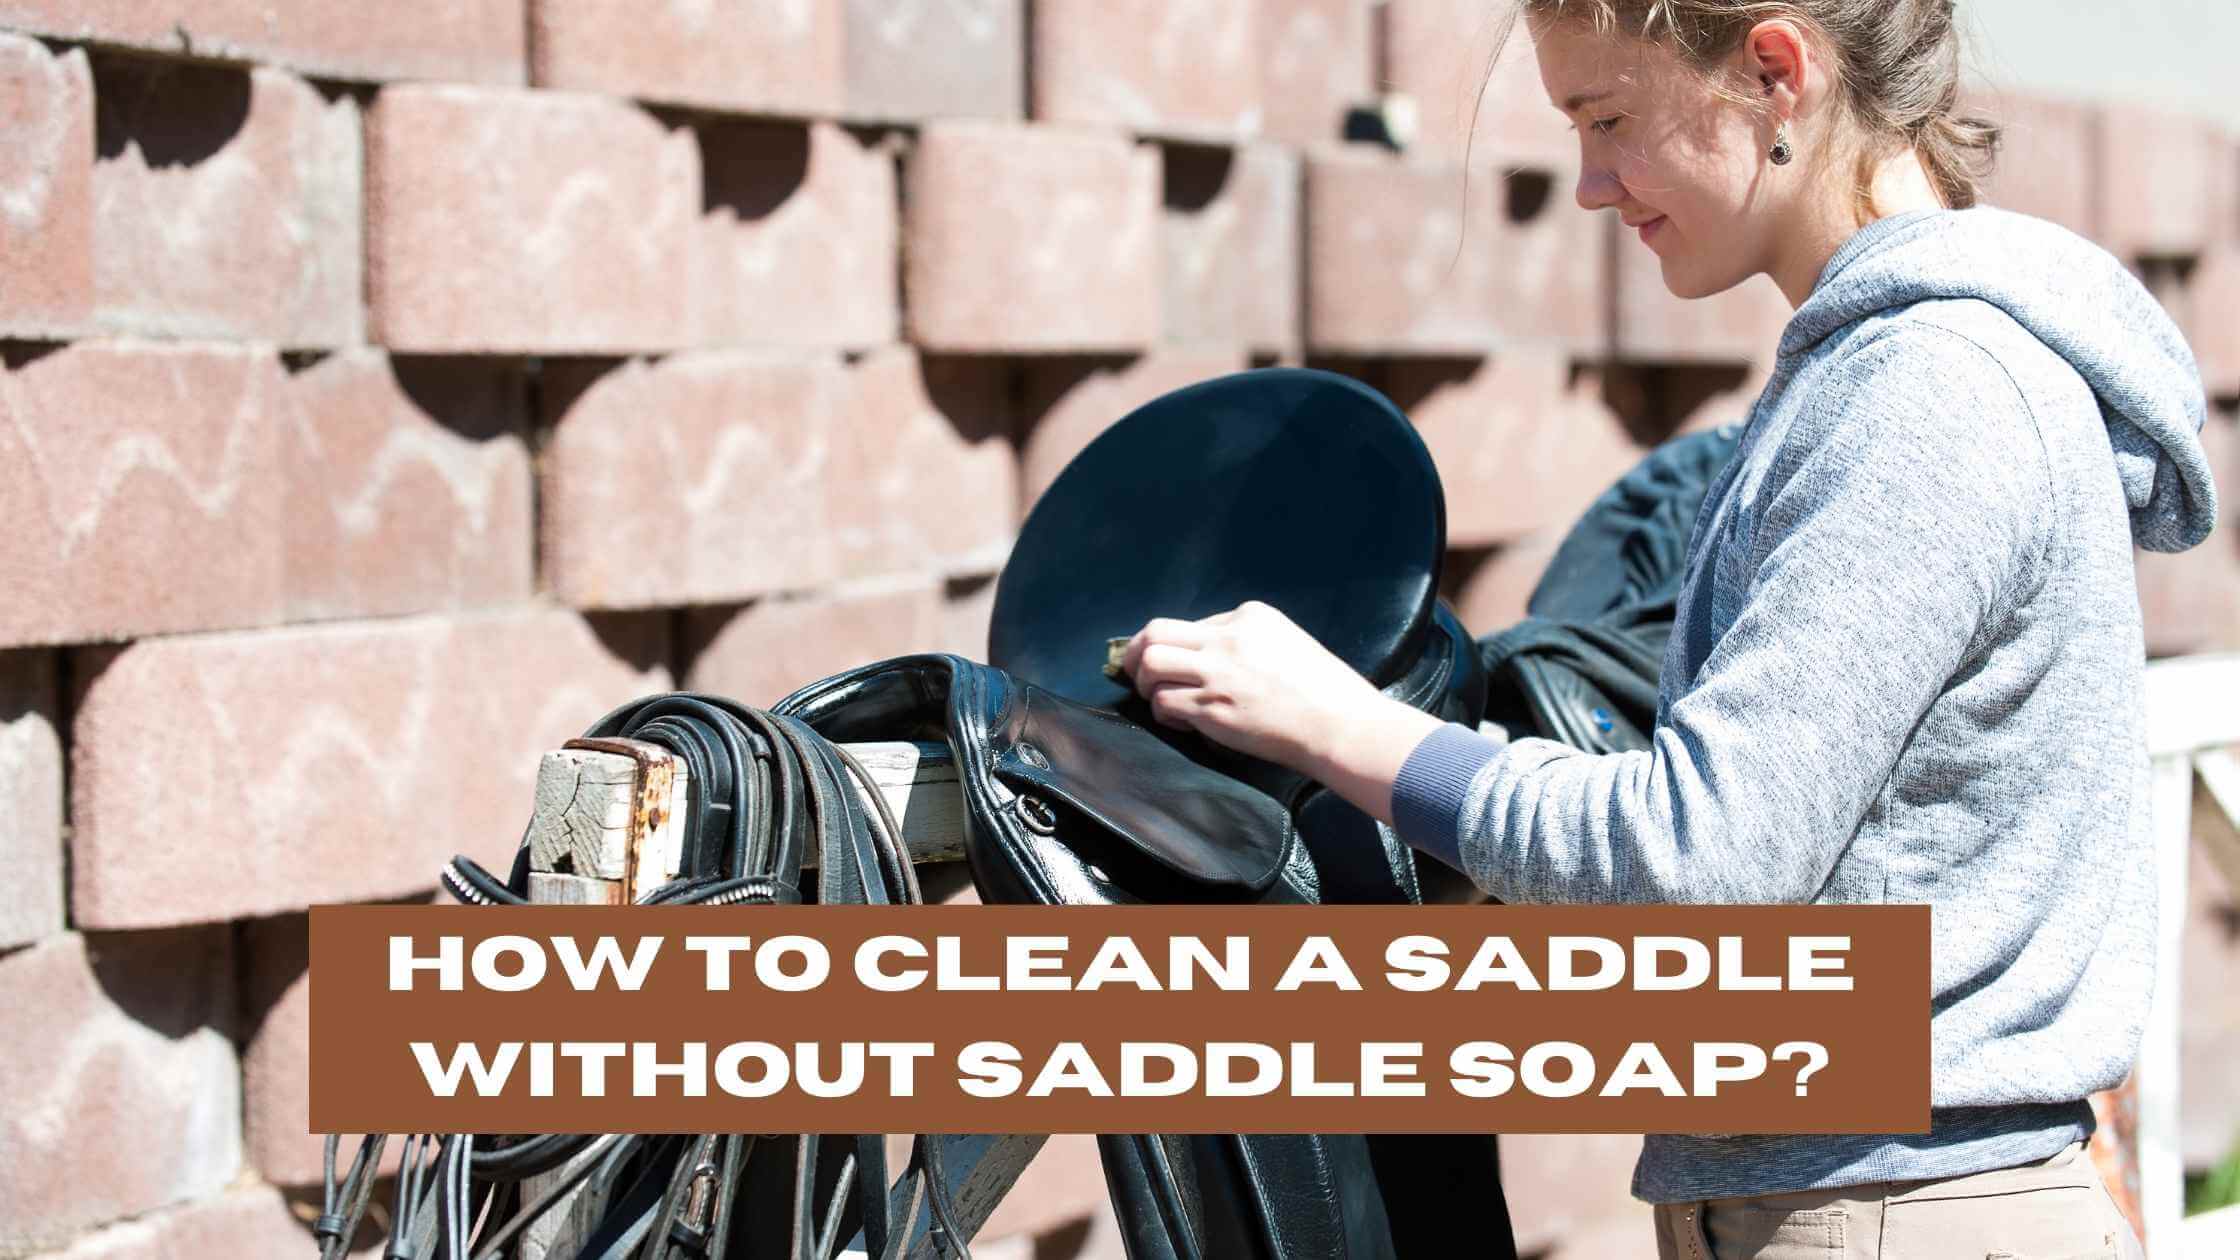 How to Clean a Saddle Without Saddle Soap